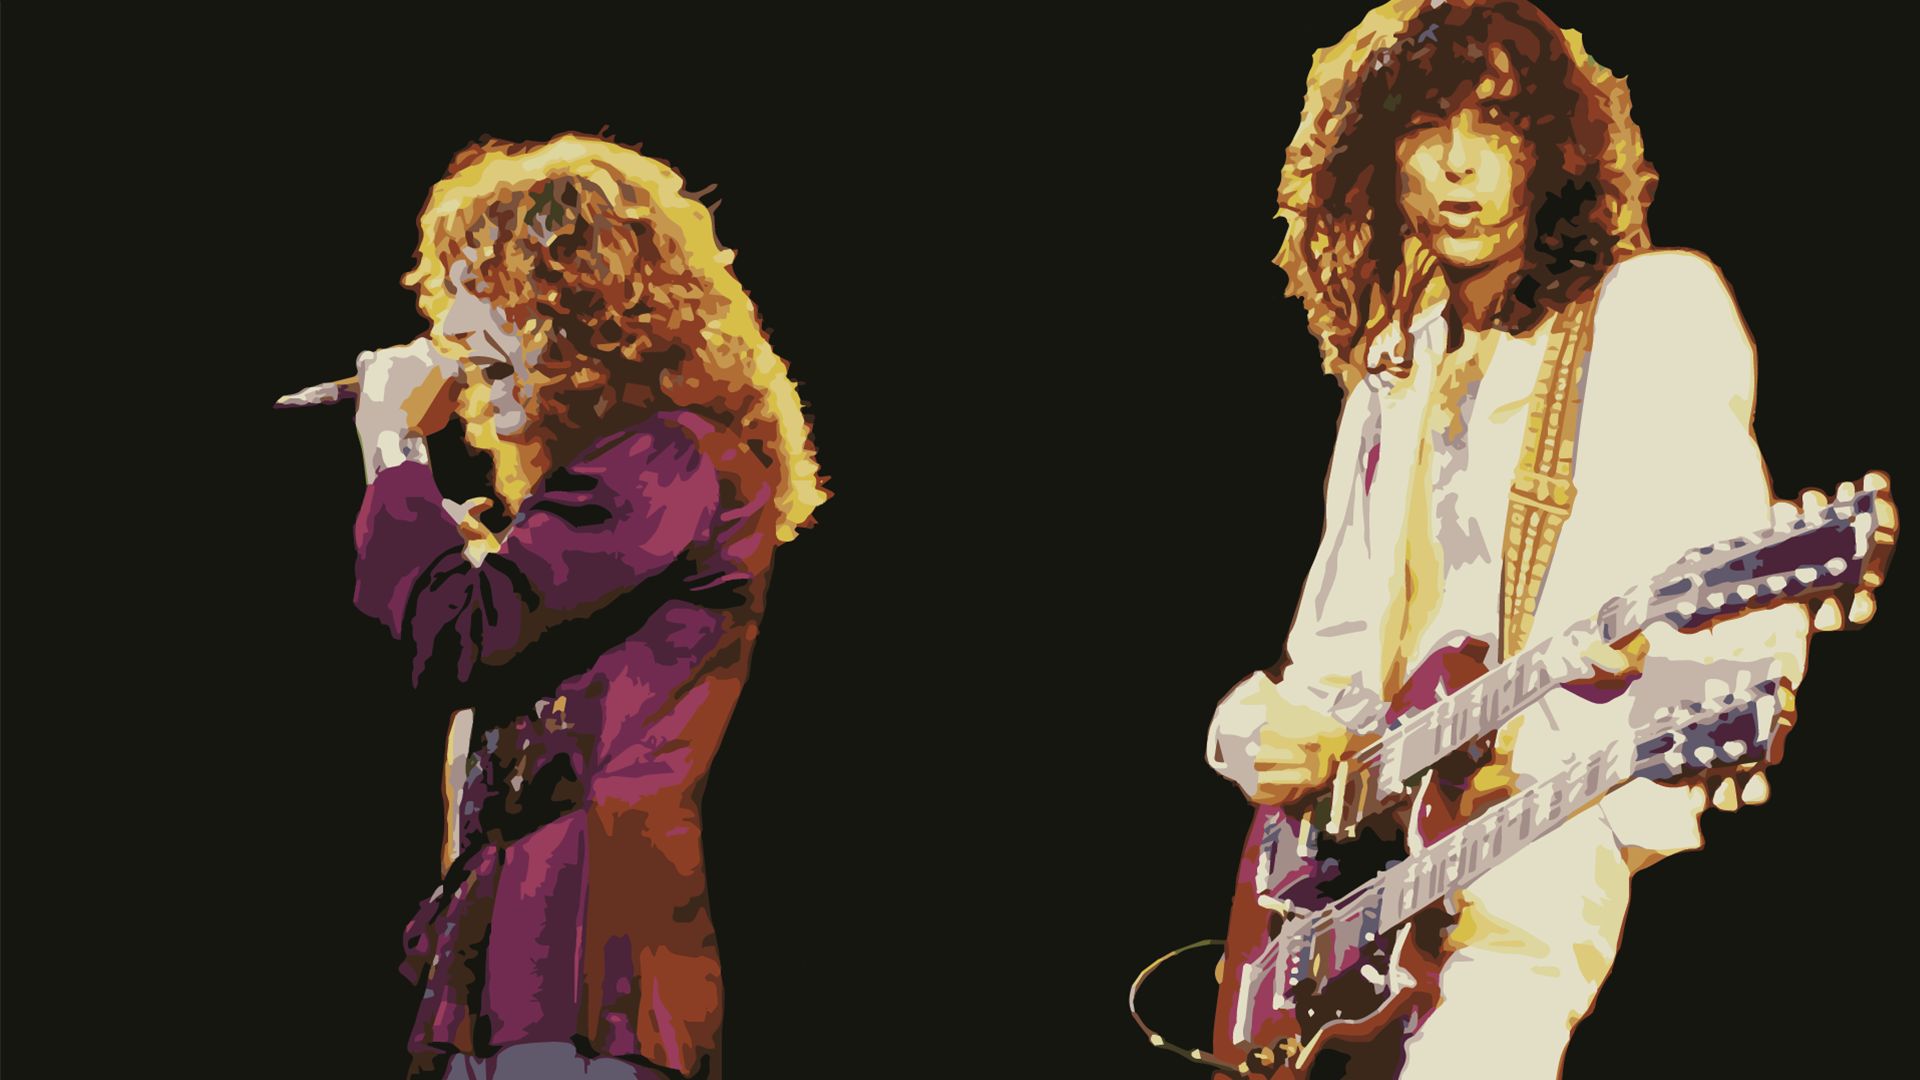 robert plant, music, led zeppelin, jimmy page, rock (music)